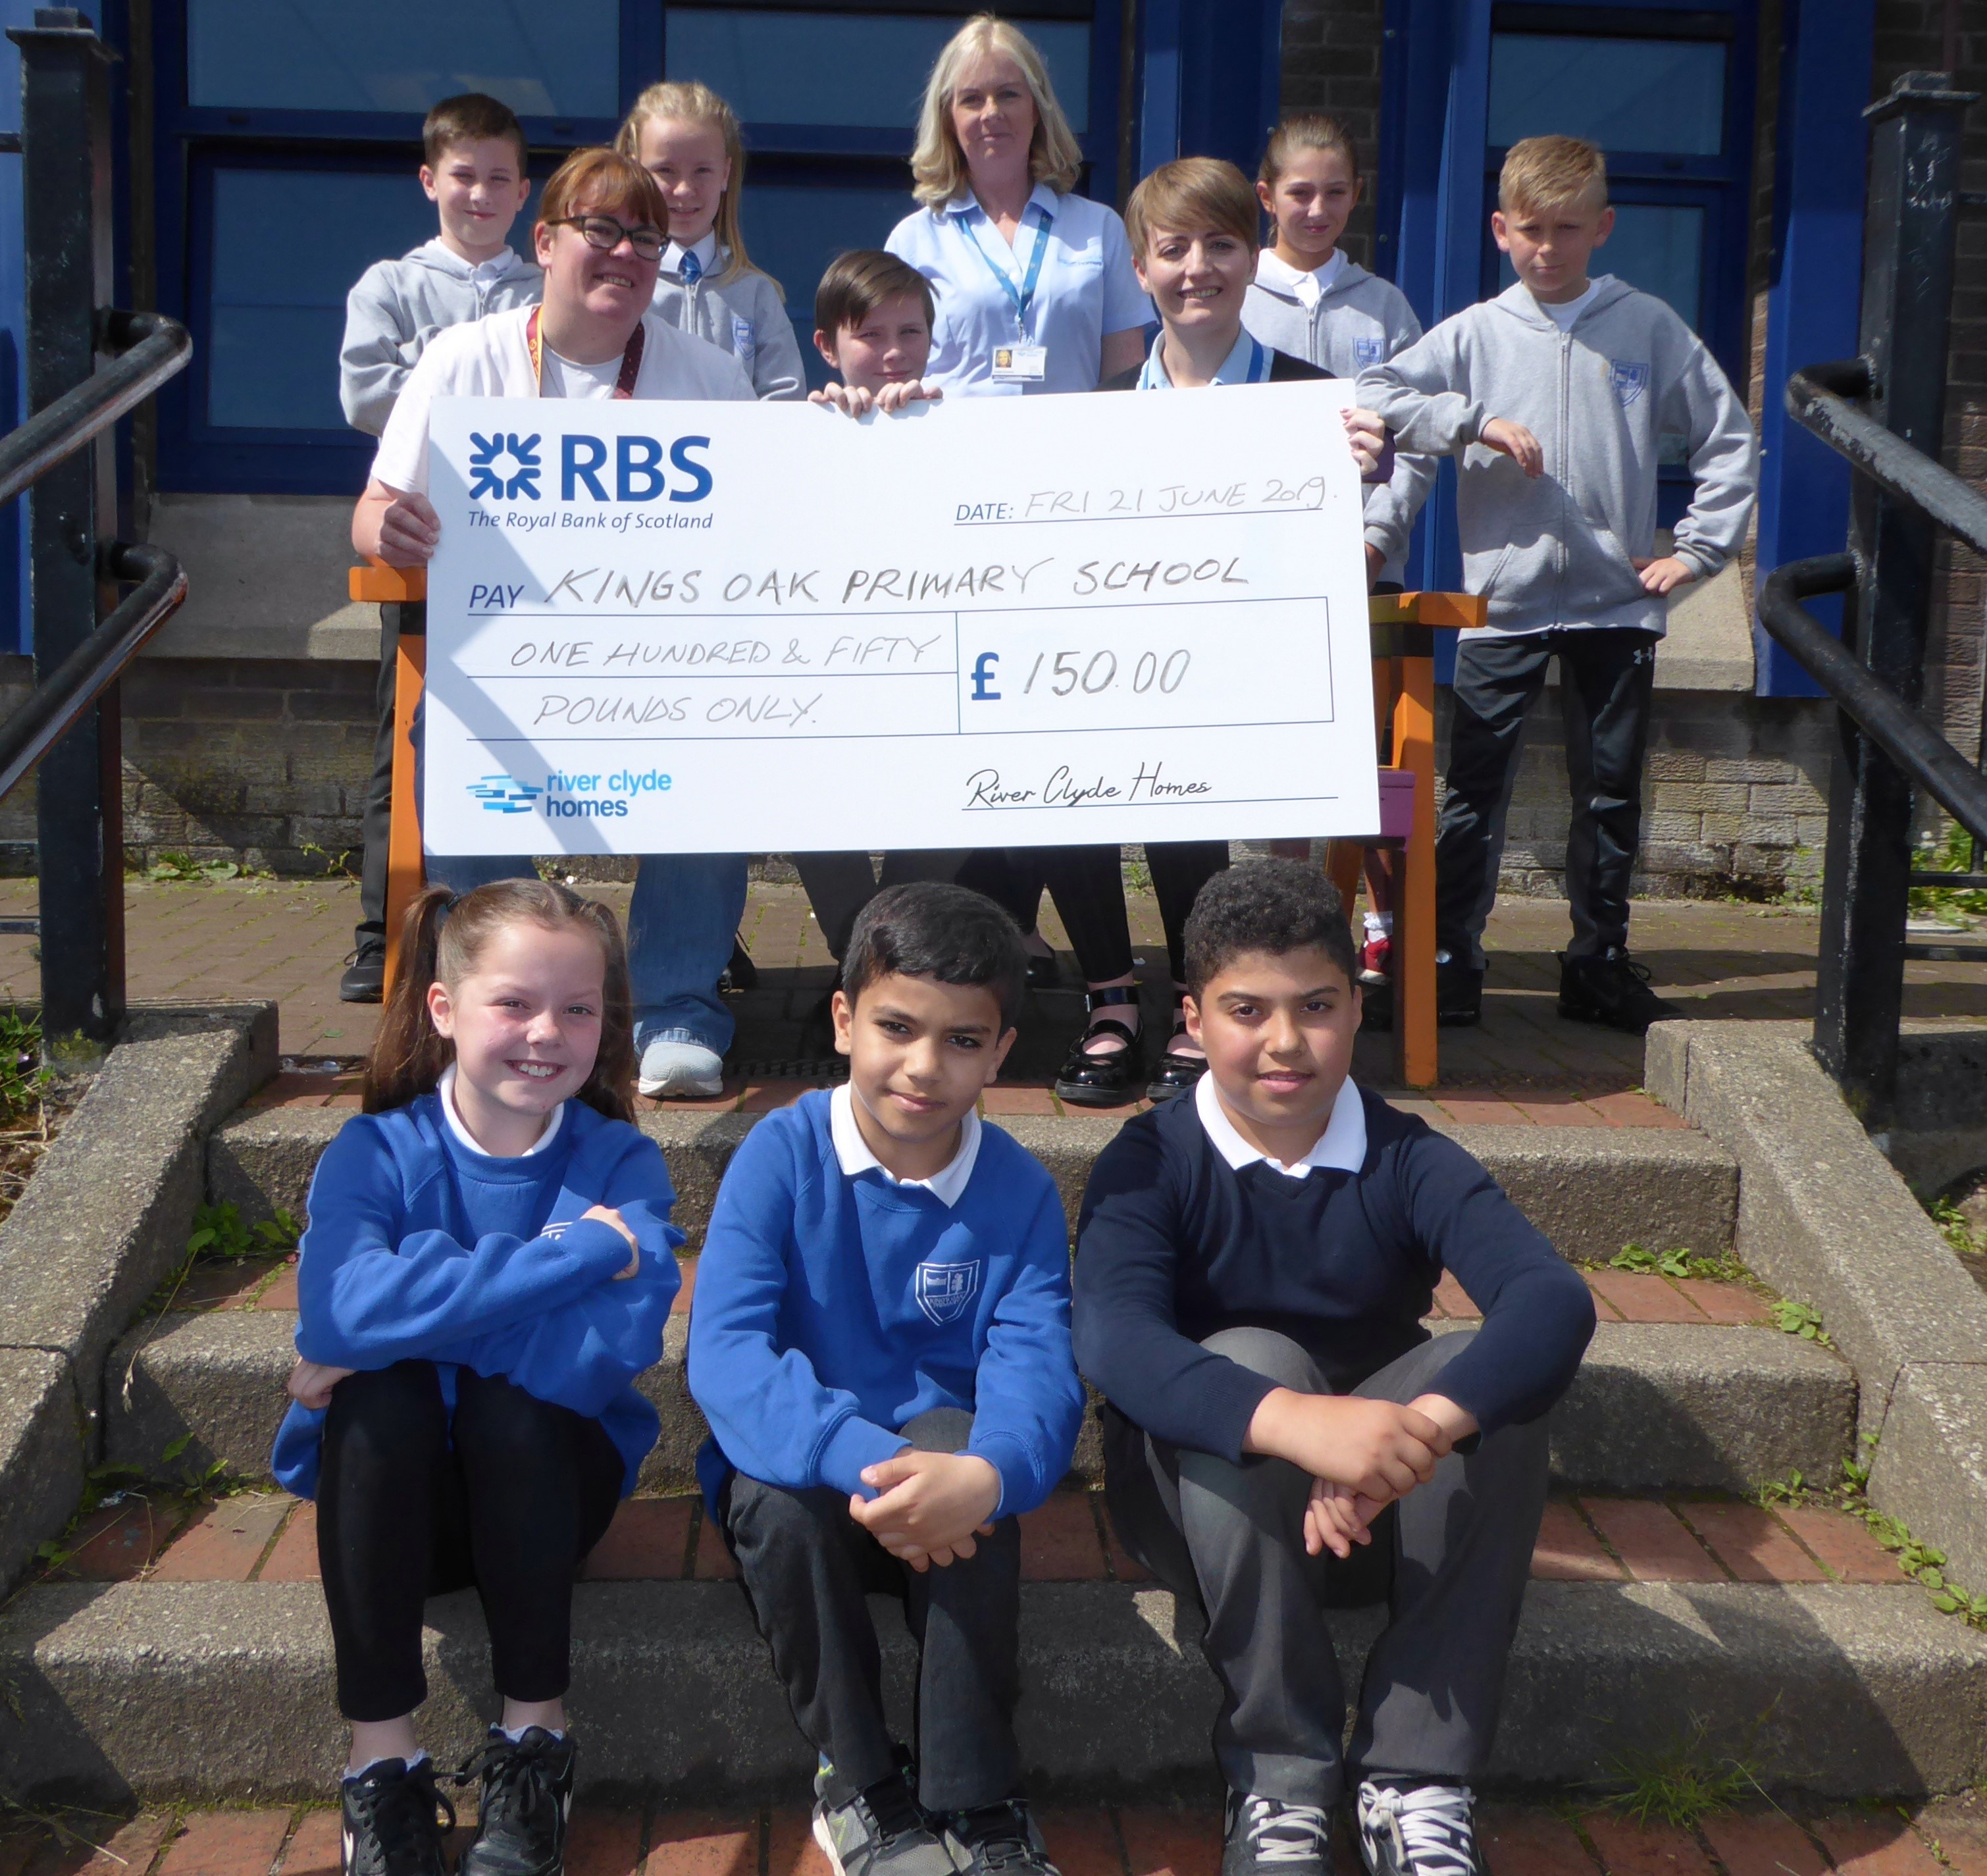 Local schools benefit from River Clyde Homes clothing drive